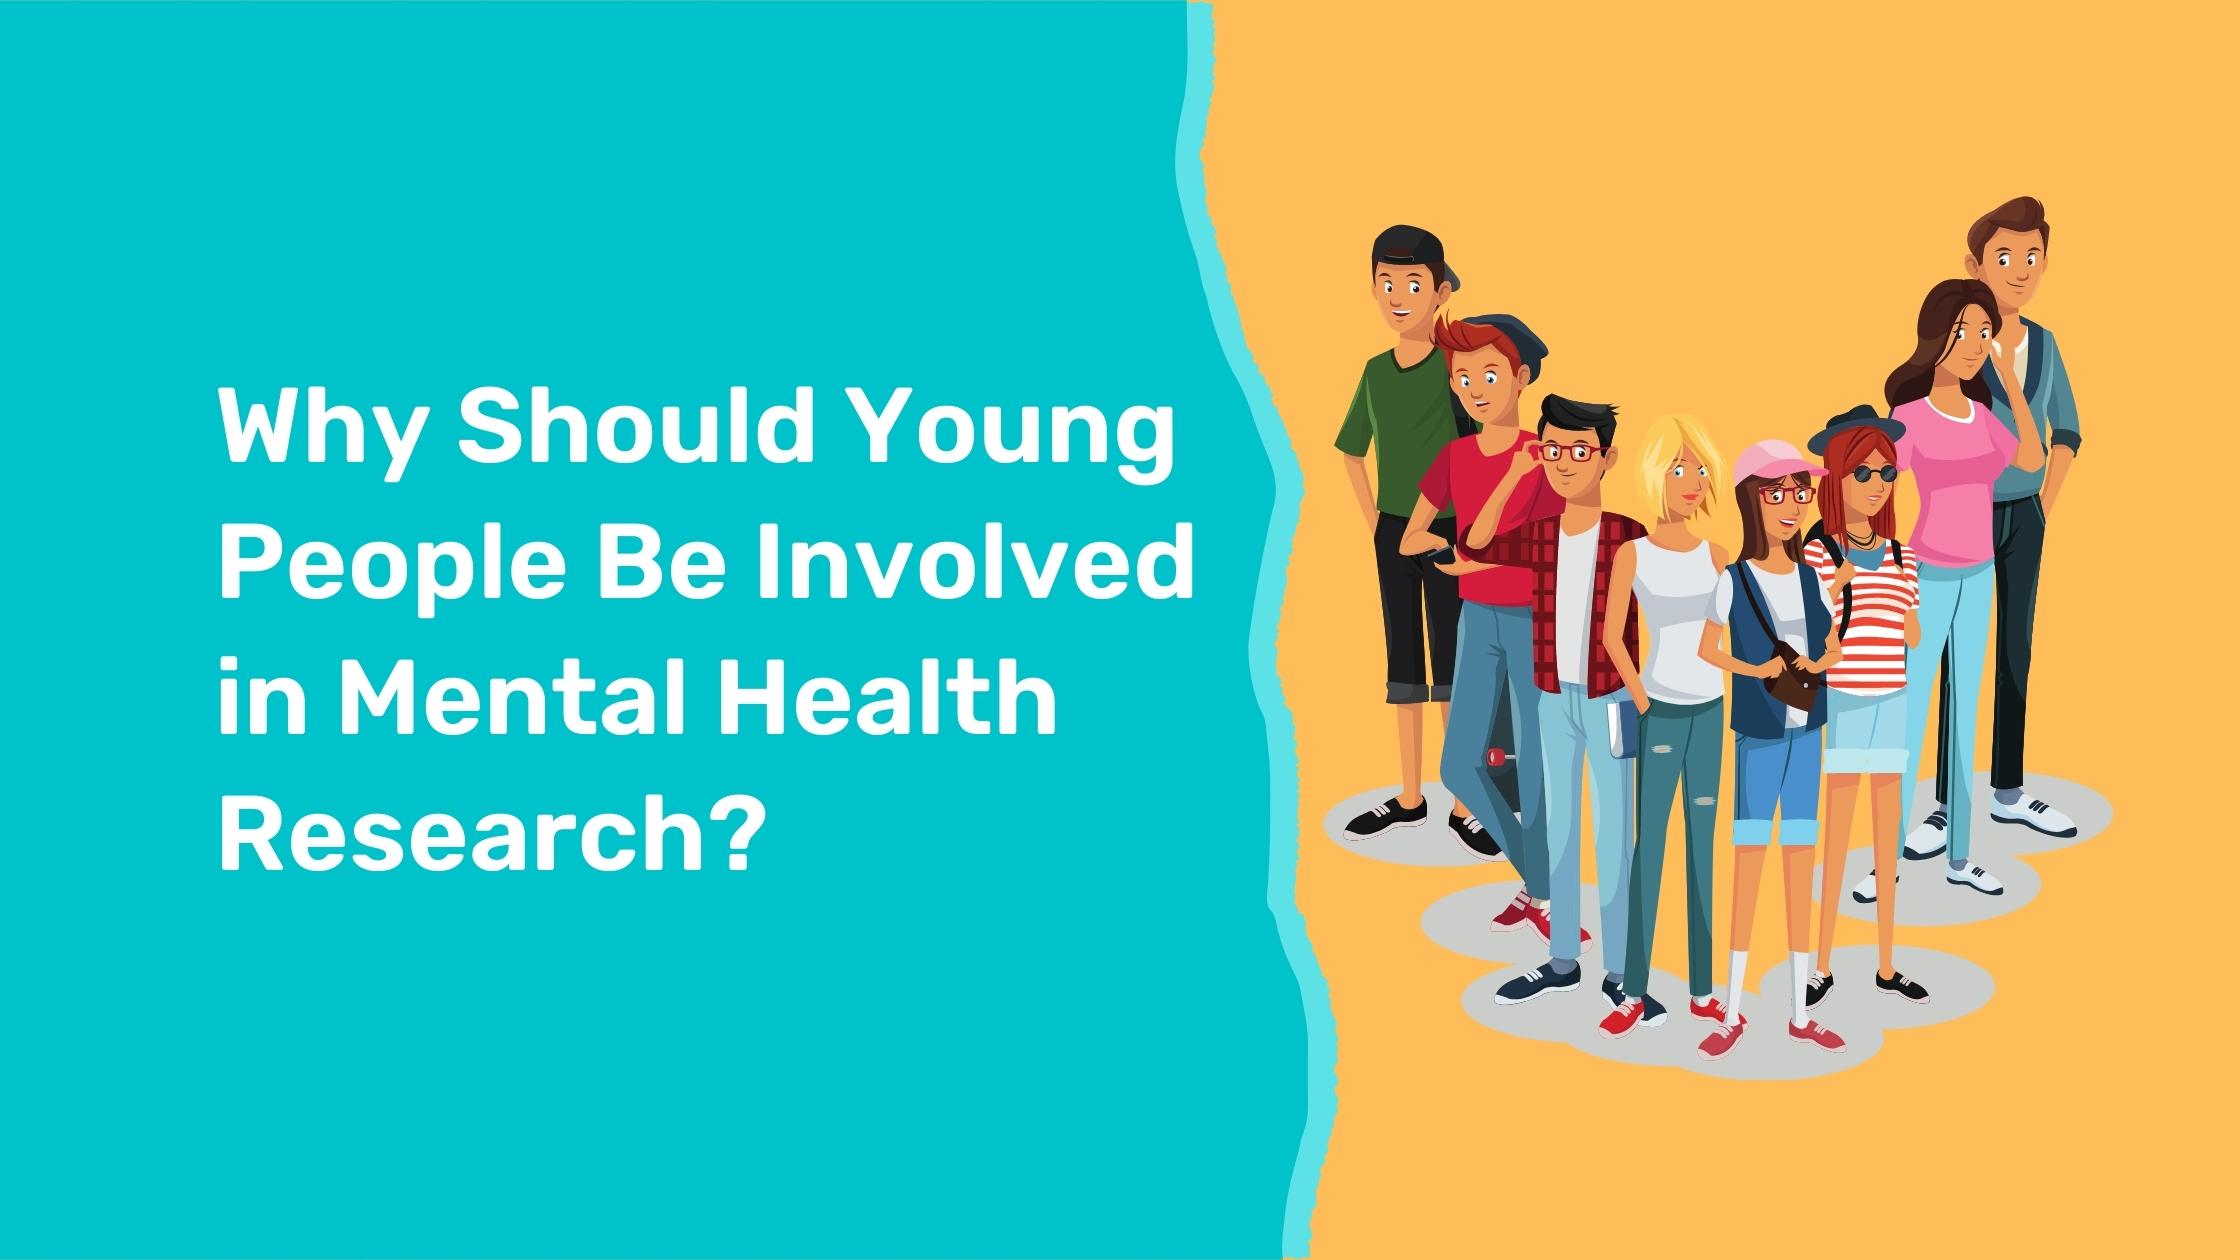 Why Should Young People Be Involved in Mental Health Research?